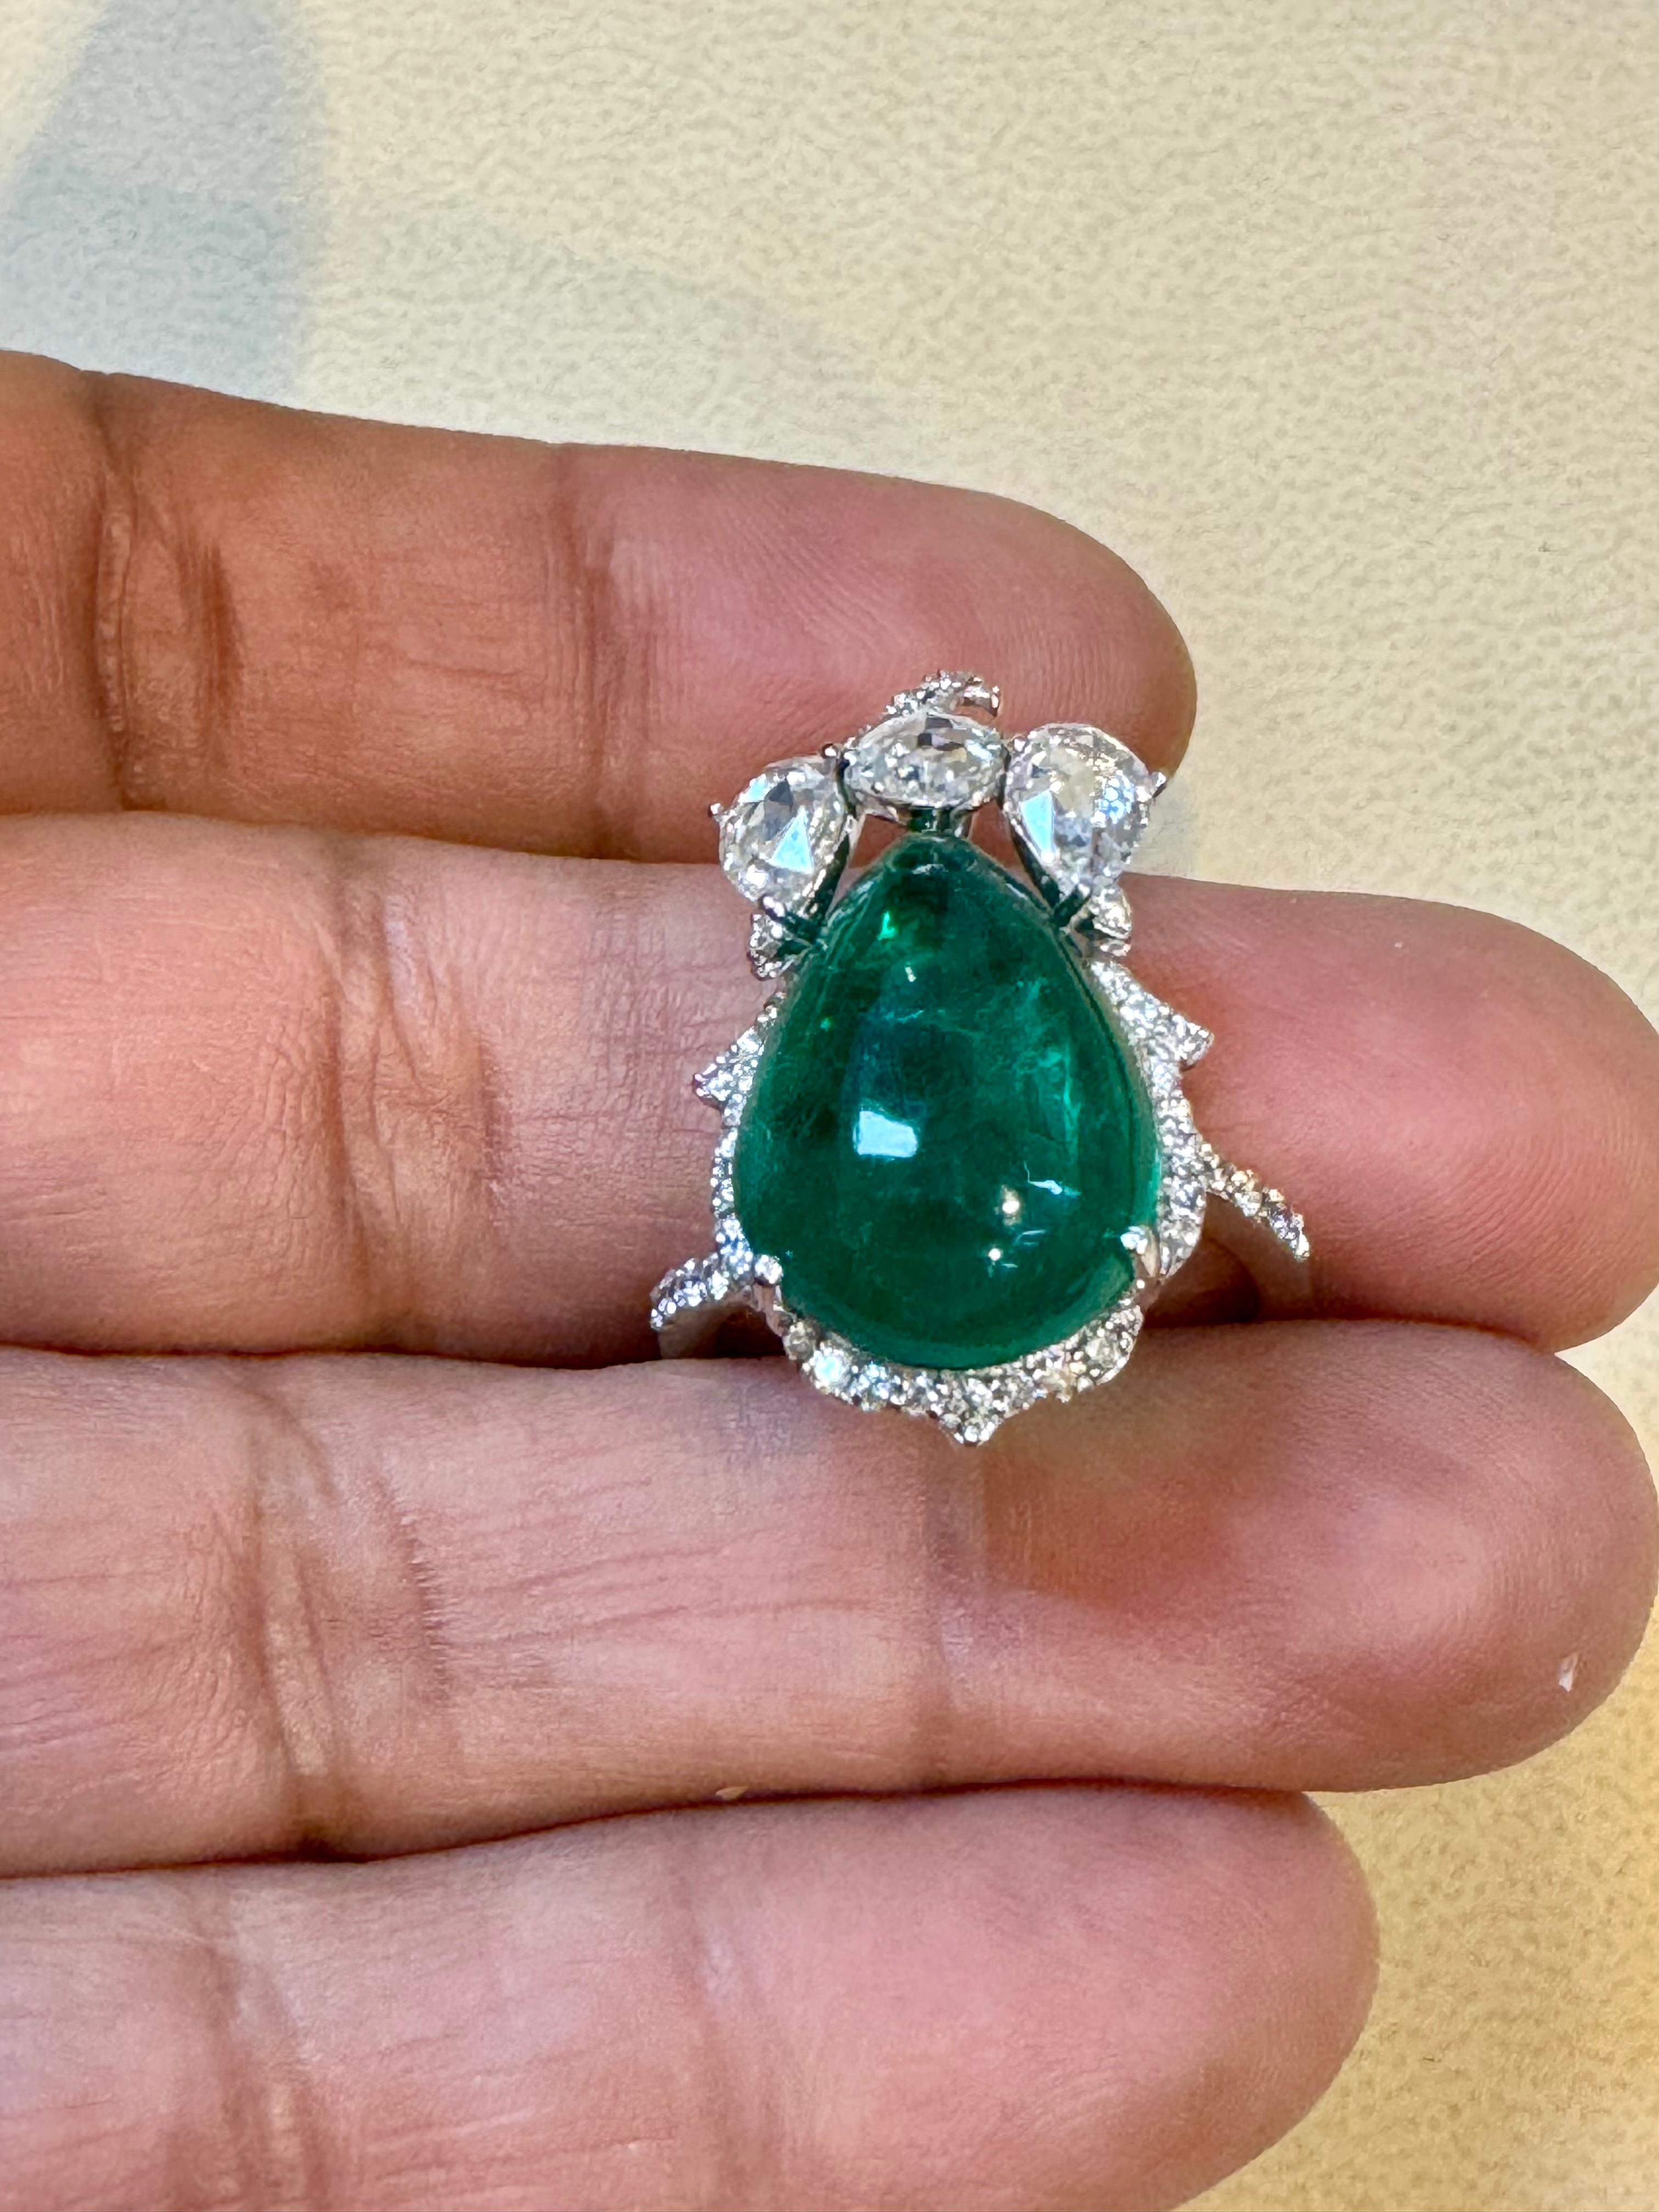 9 Ct Finest Zambian Sugar Loaf Emerald & 2 Ct Rose Cut Diamond Ring Size 7 For Sale 6